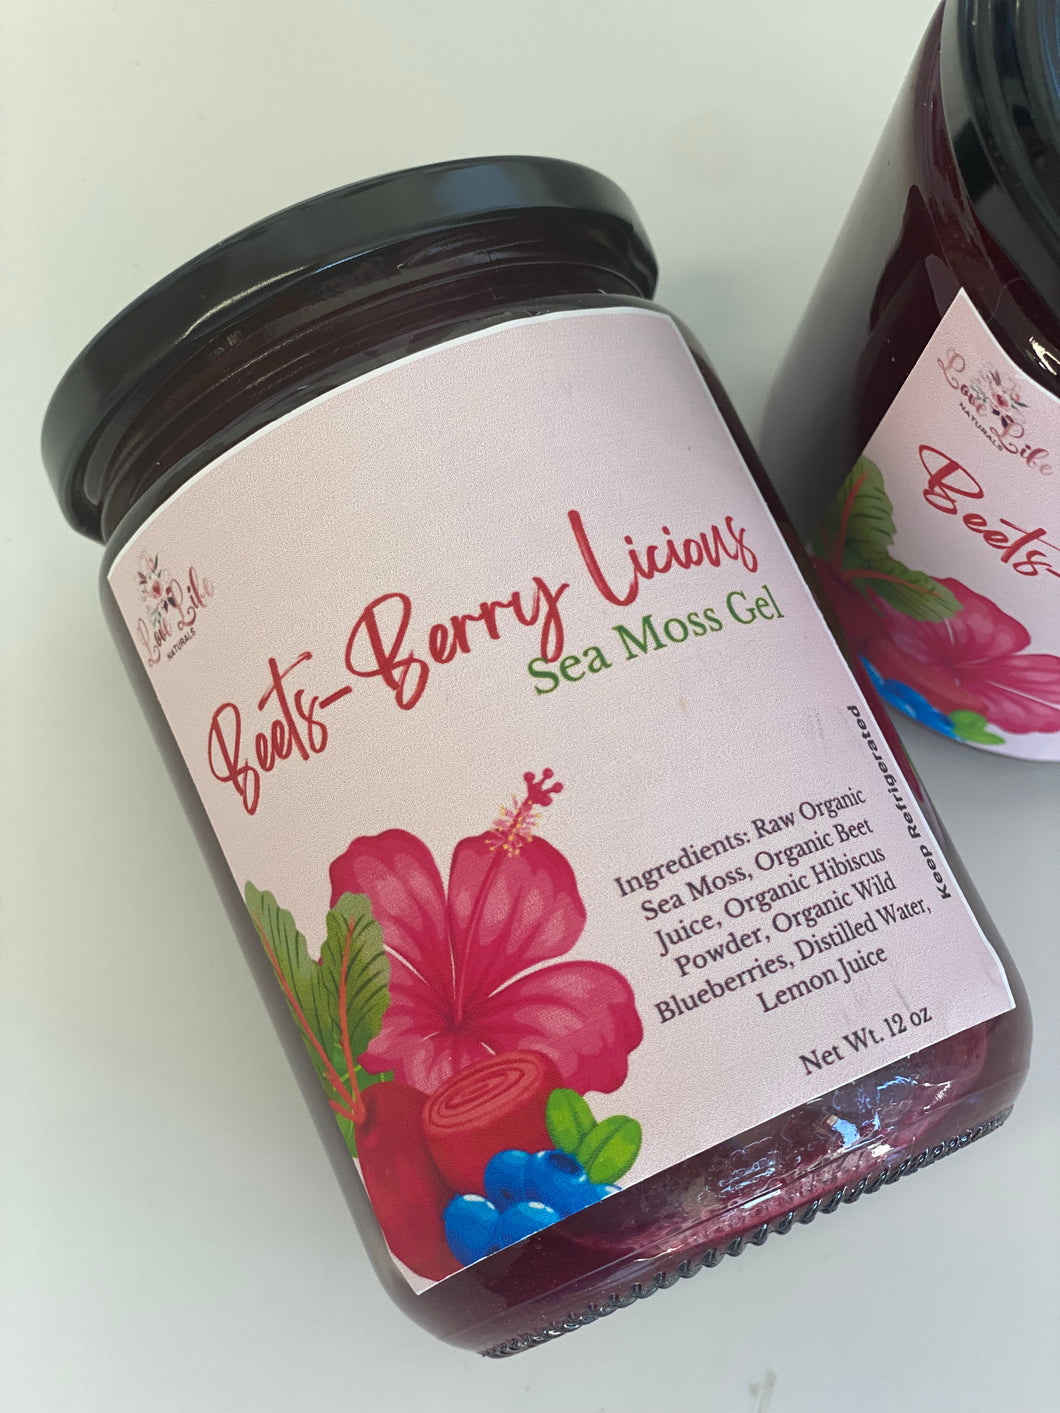 Beets Berry- Licious Sea Moss Gel